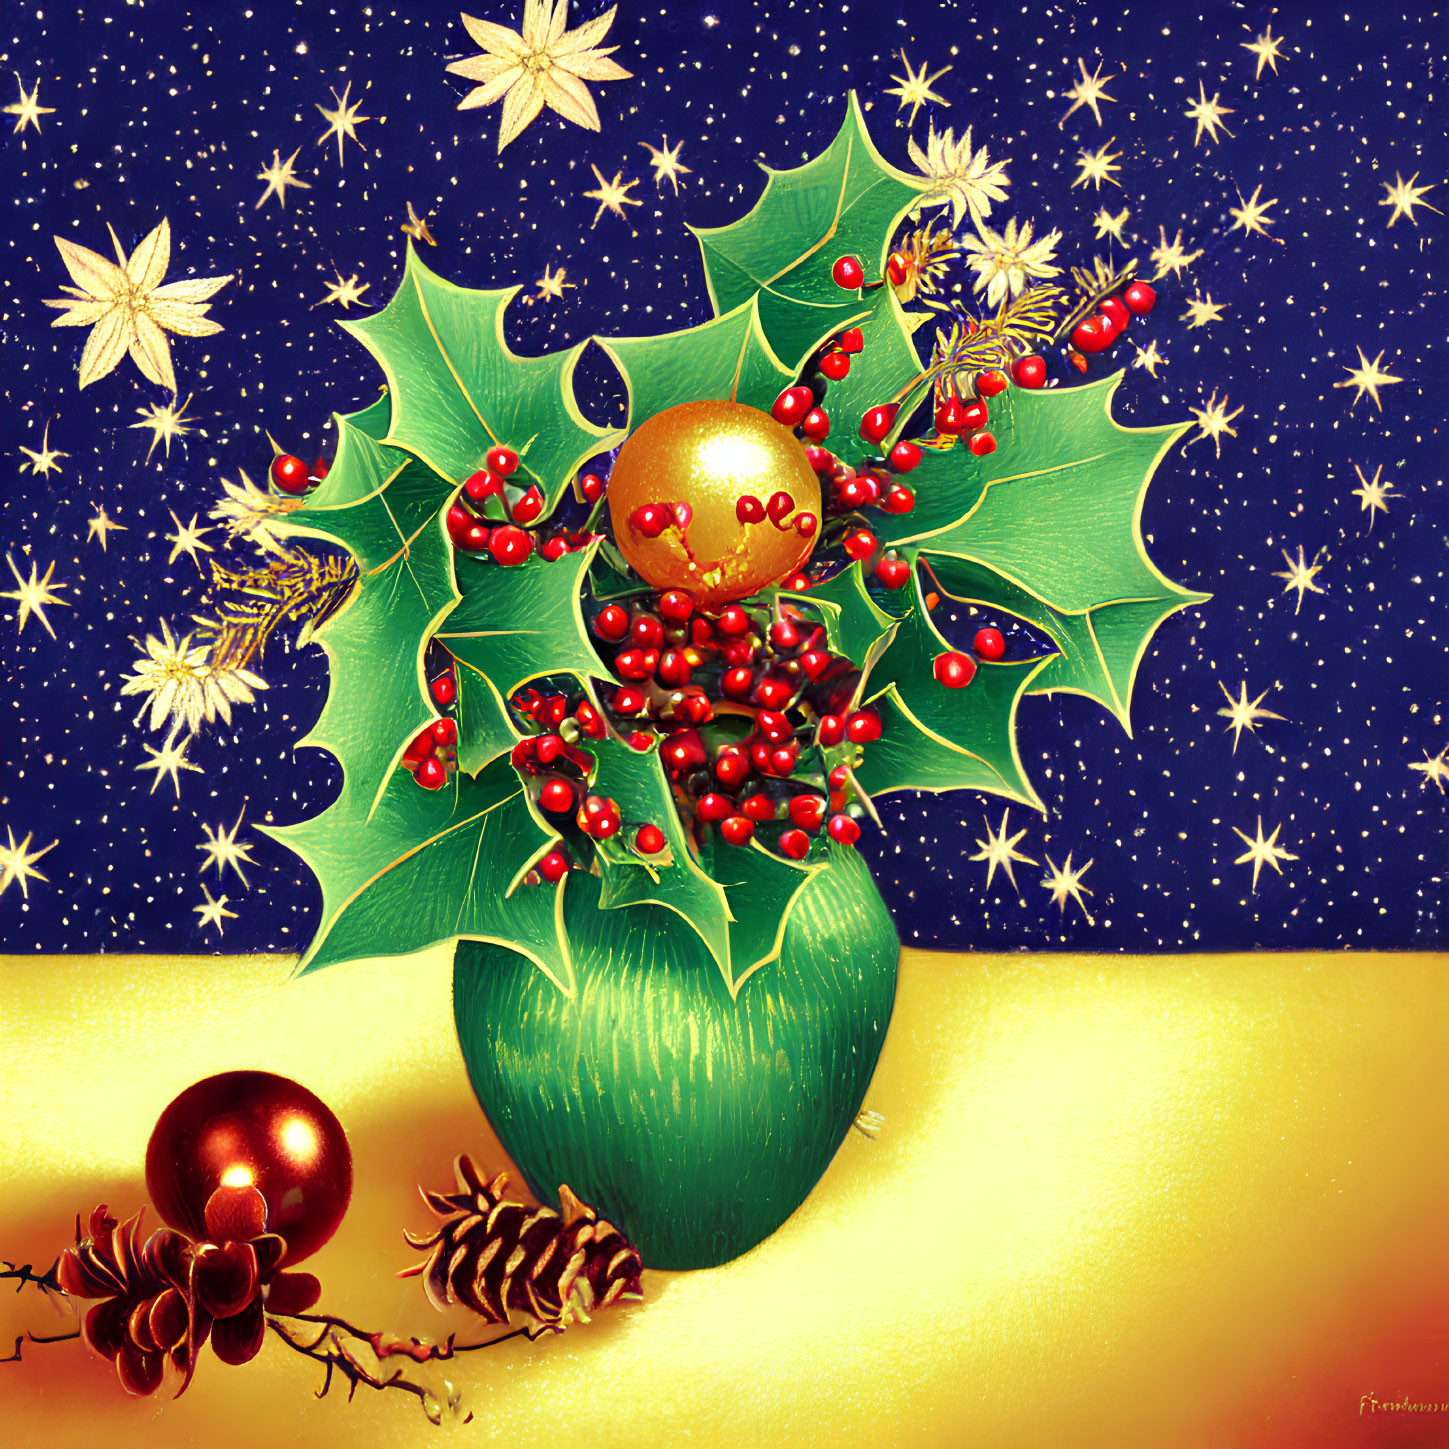 Festive vase with holly, pine cones, and ornaments on starry night background